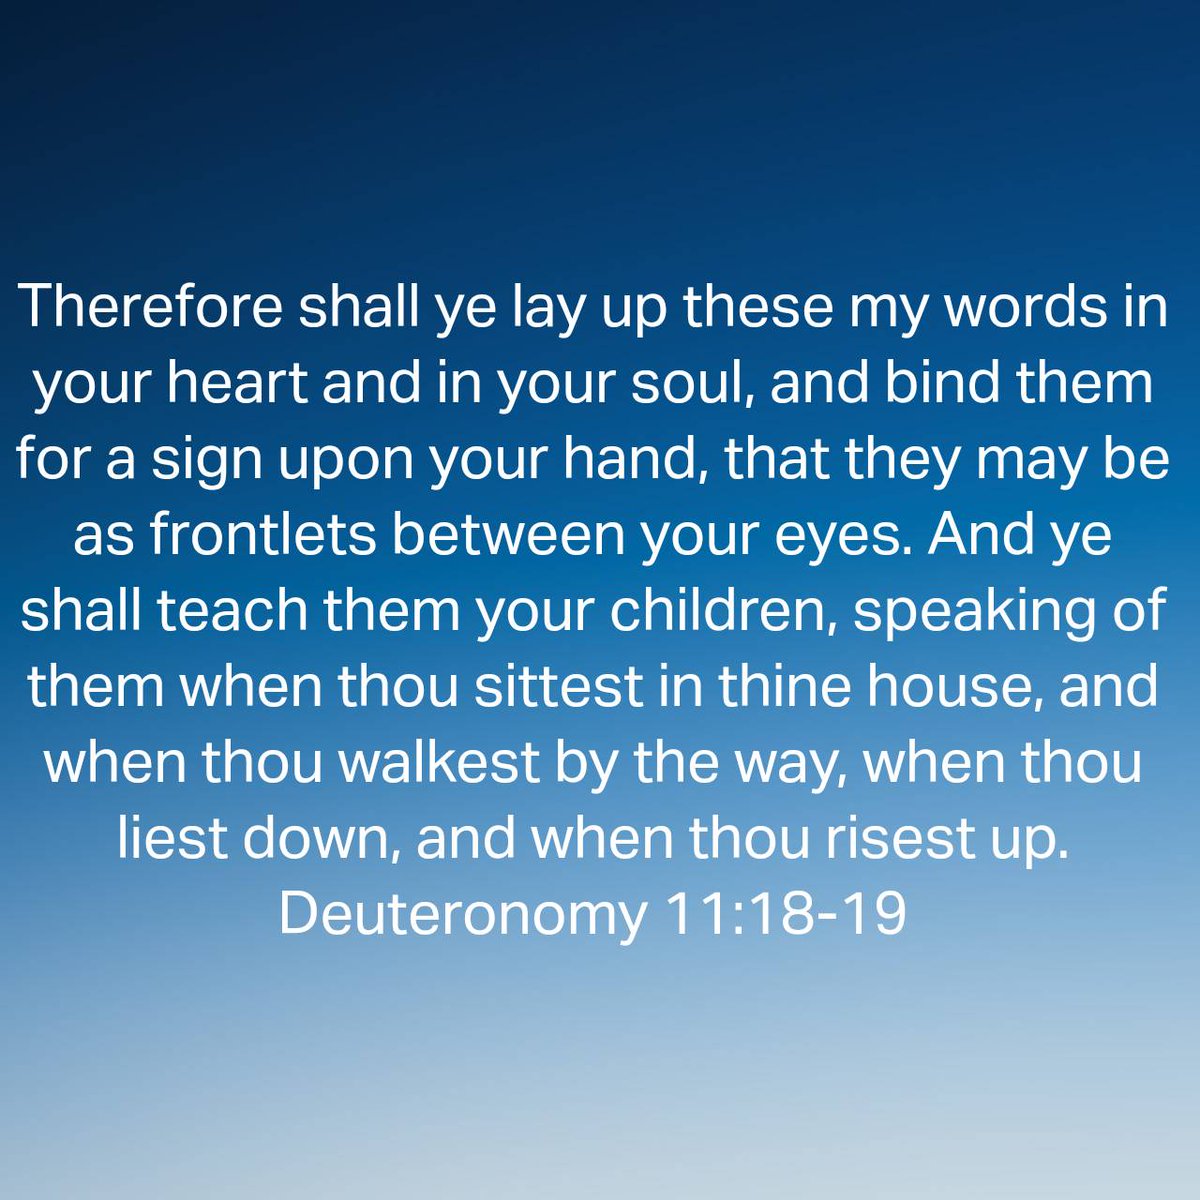 Deuteronomy 11:18-19
Therefore shall ye lay up these my words in your heart and in your soul, and bind them for a sign upon your hand, that they may be as frontlets between your eyes. And ye shall teach them your children, speaking of them...
#bible #bibleverse #verseoftheday